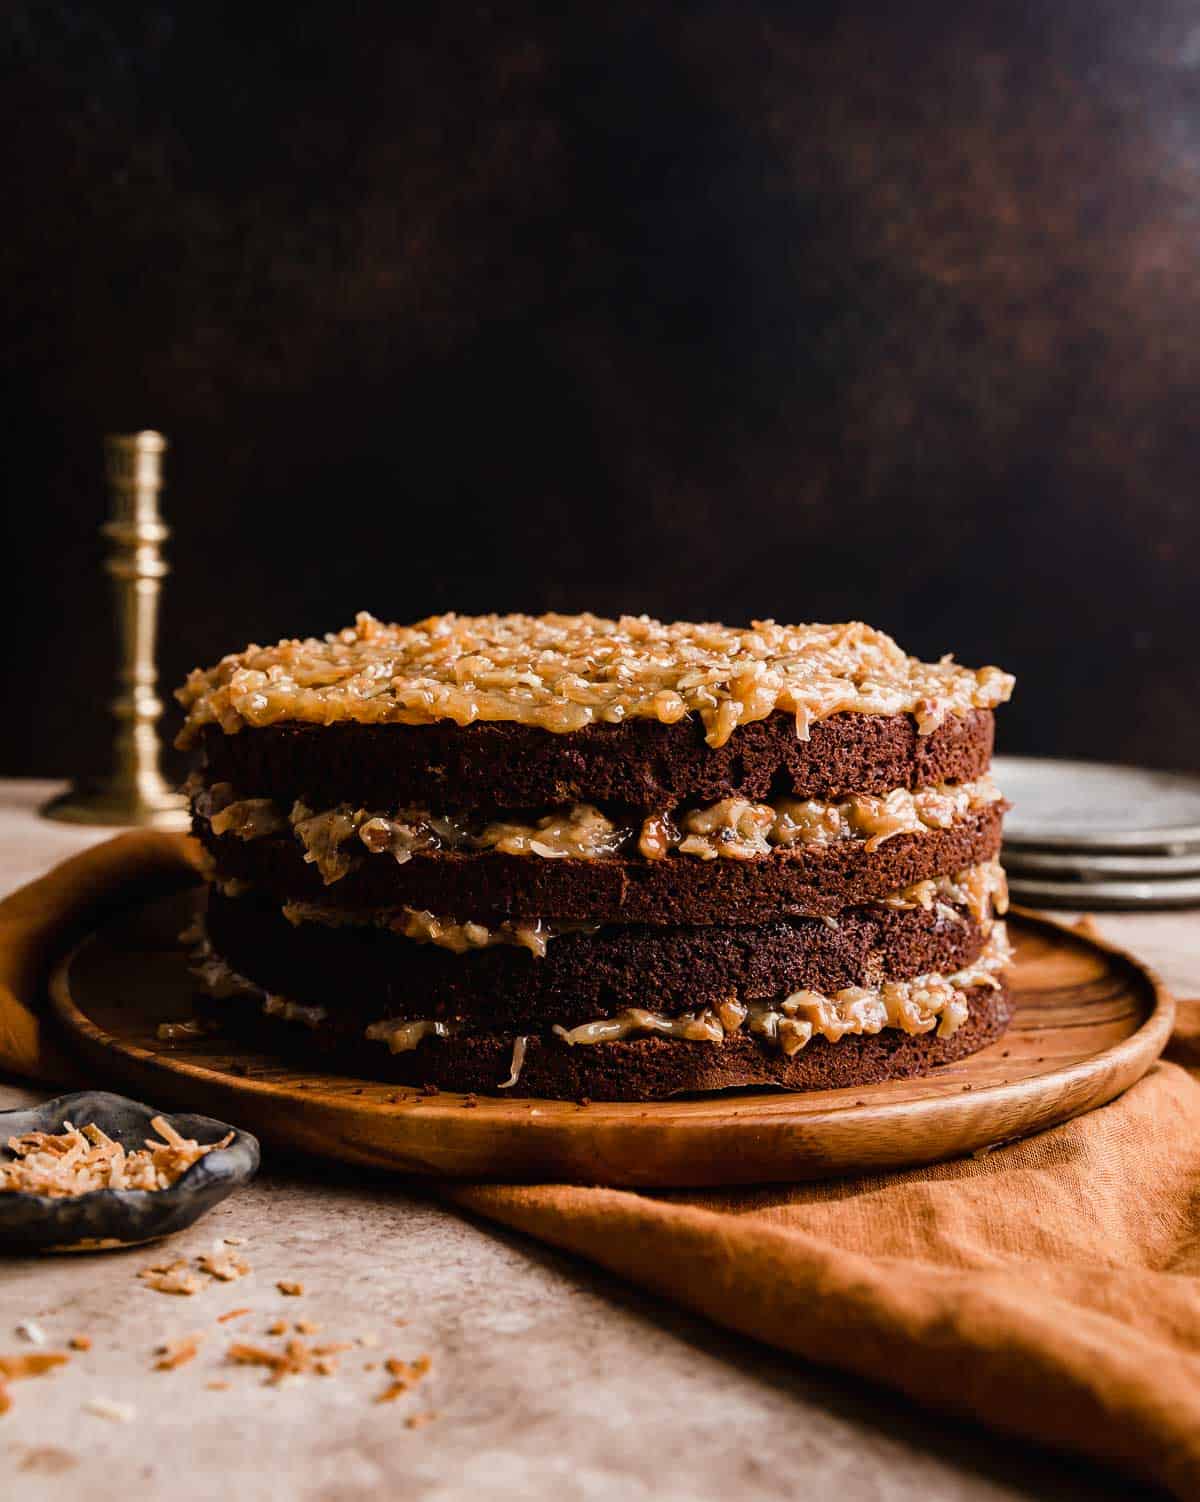 The best Traditional German Chocolate Cake recipe, four layers of chocolate cake with coconut pecan frosting between each layer, with no frosting on the sides. 